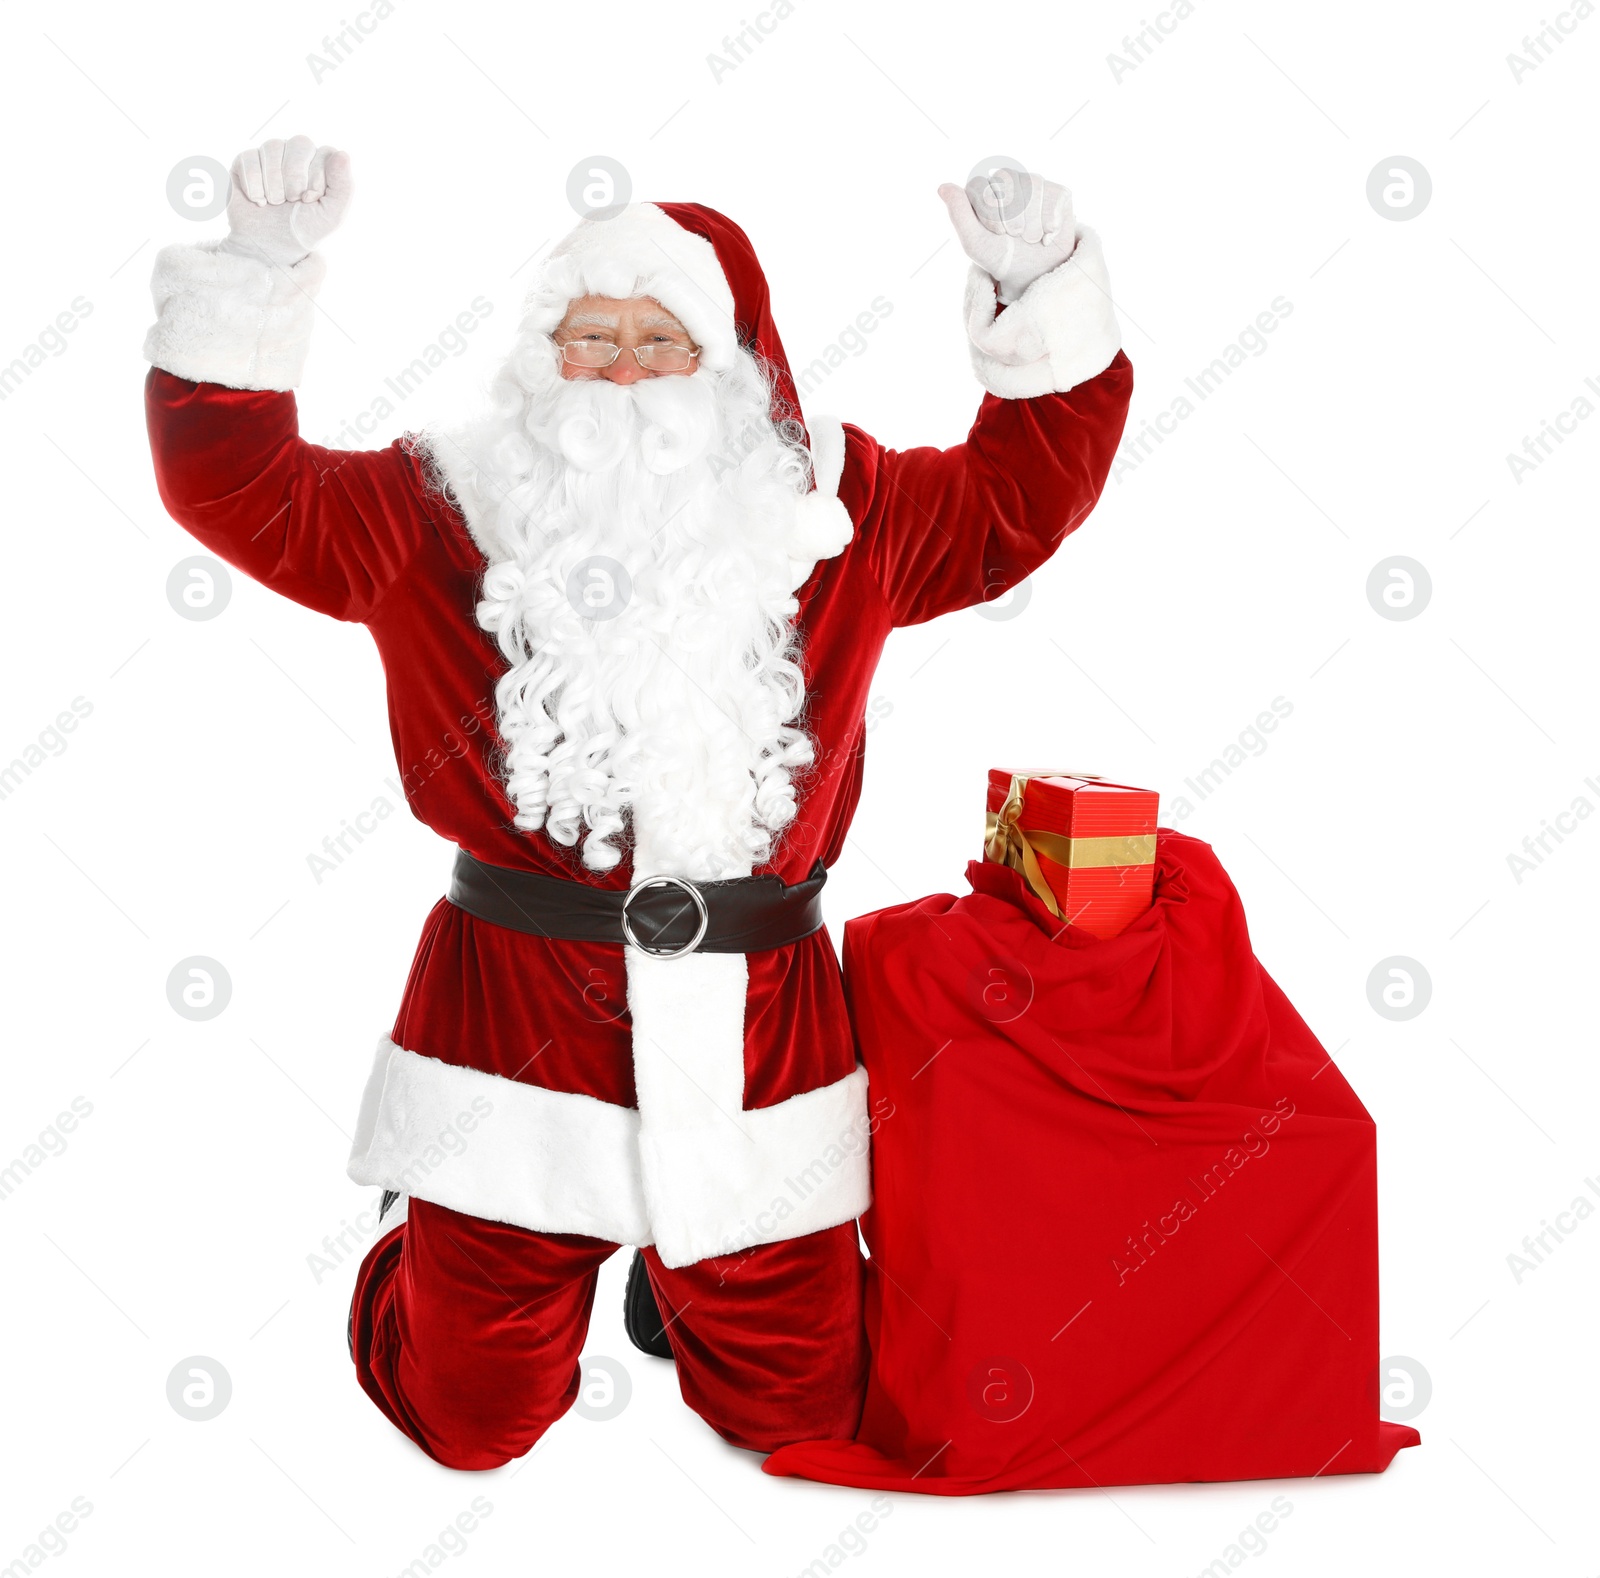 Photo of Authentic Santa Claus with bag full of gifts on white background